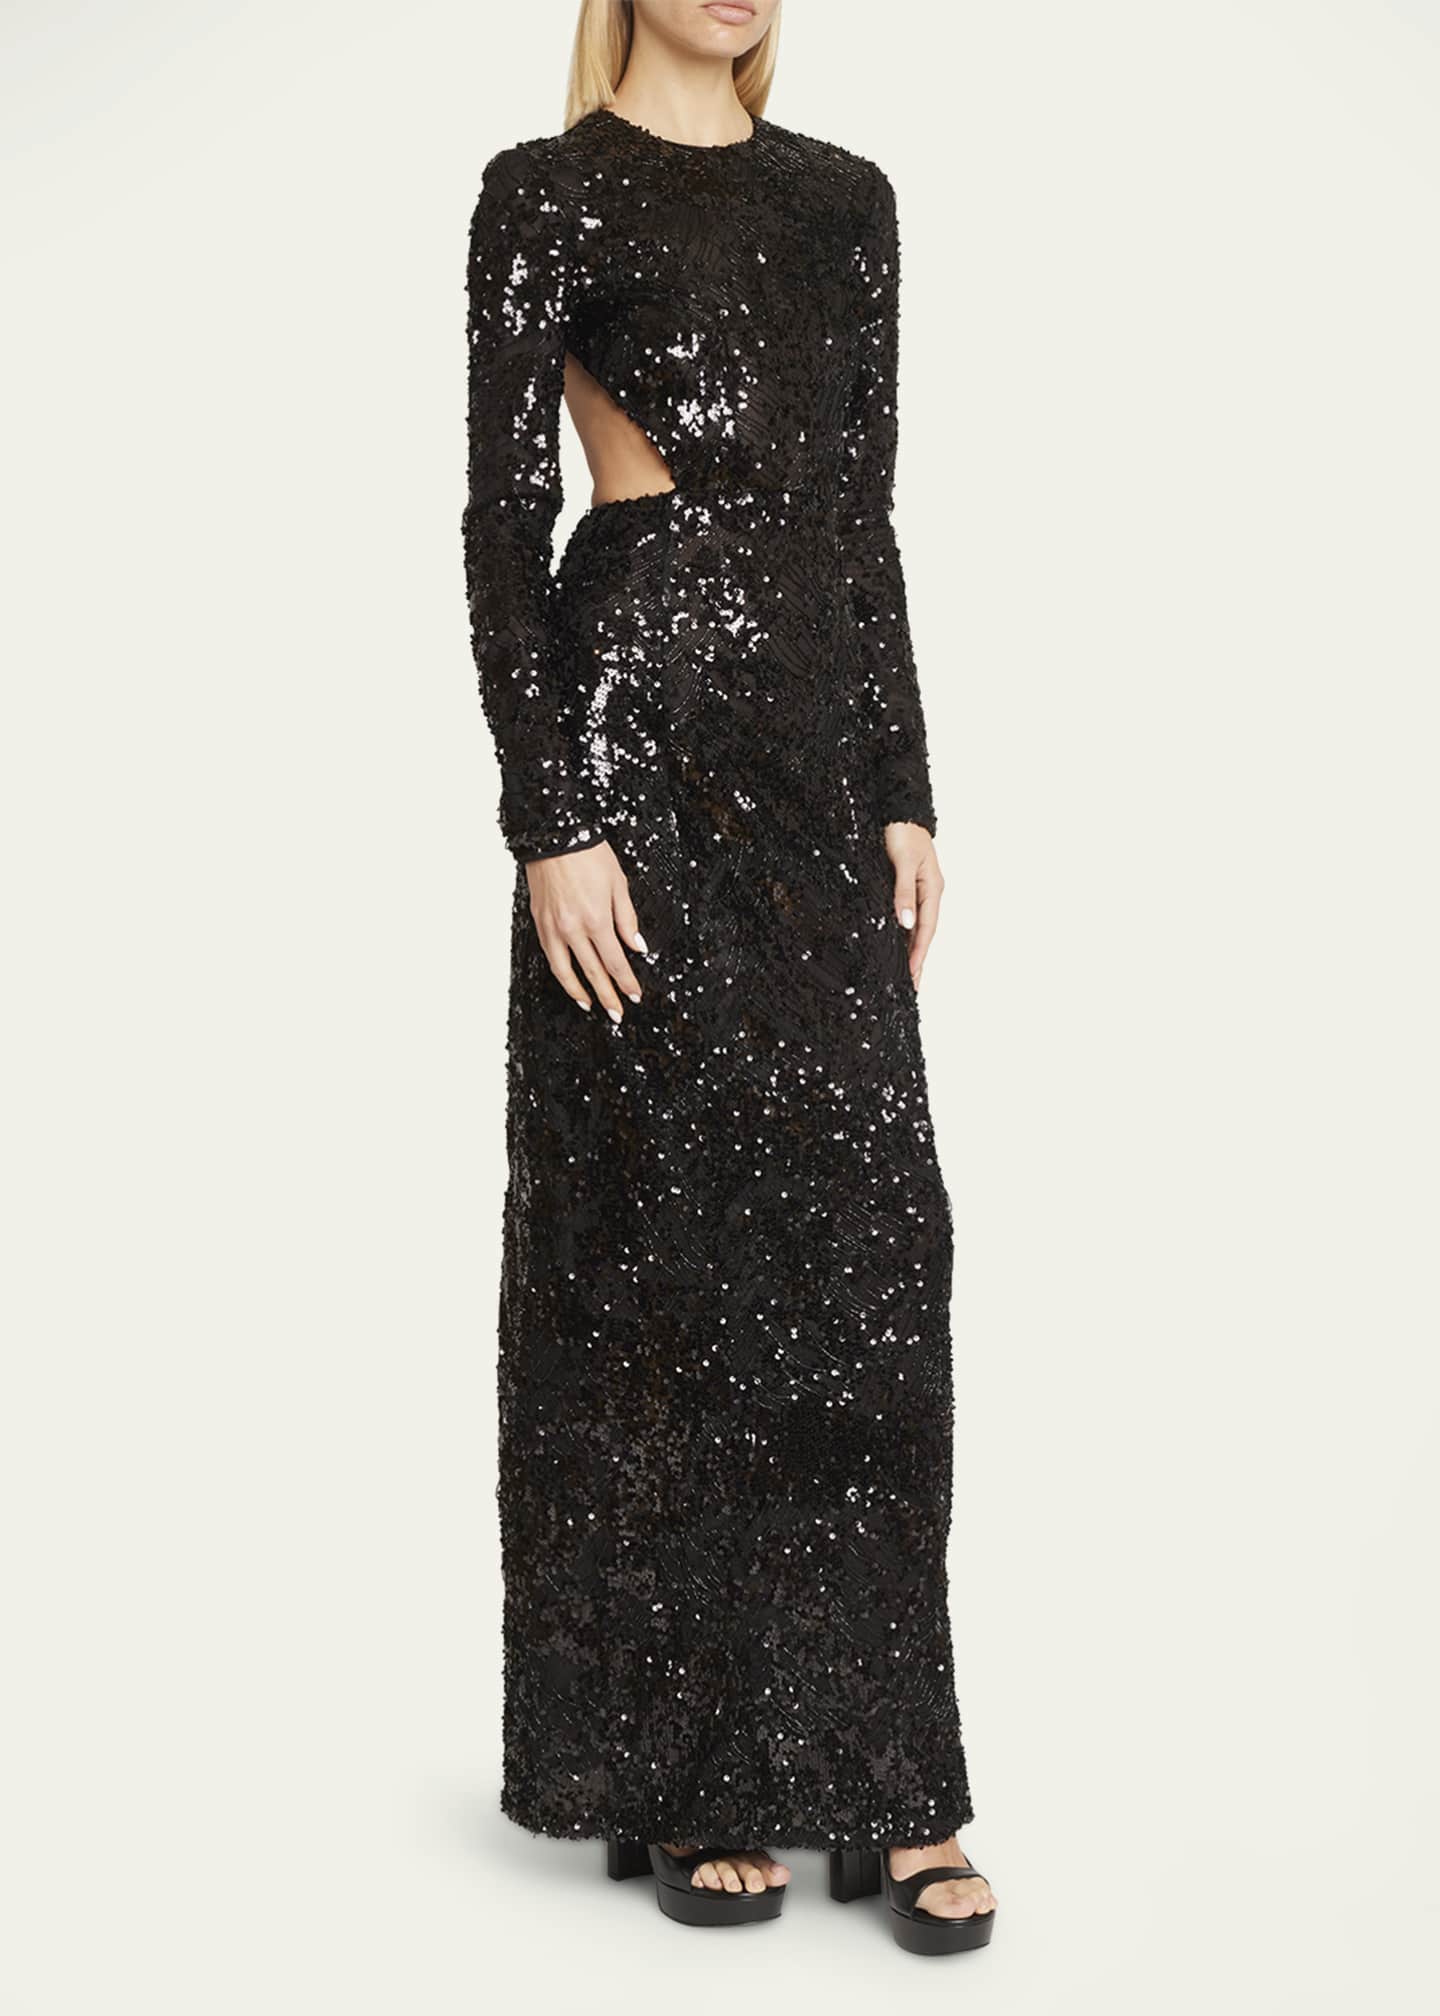 Givenchy Embroidered Sequin Gown with Cutout Detail - Bergdorf Goodman